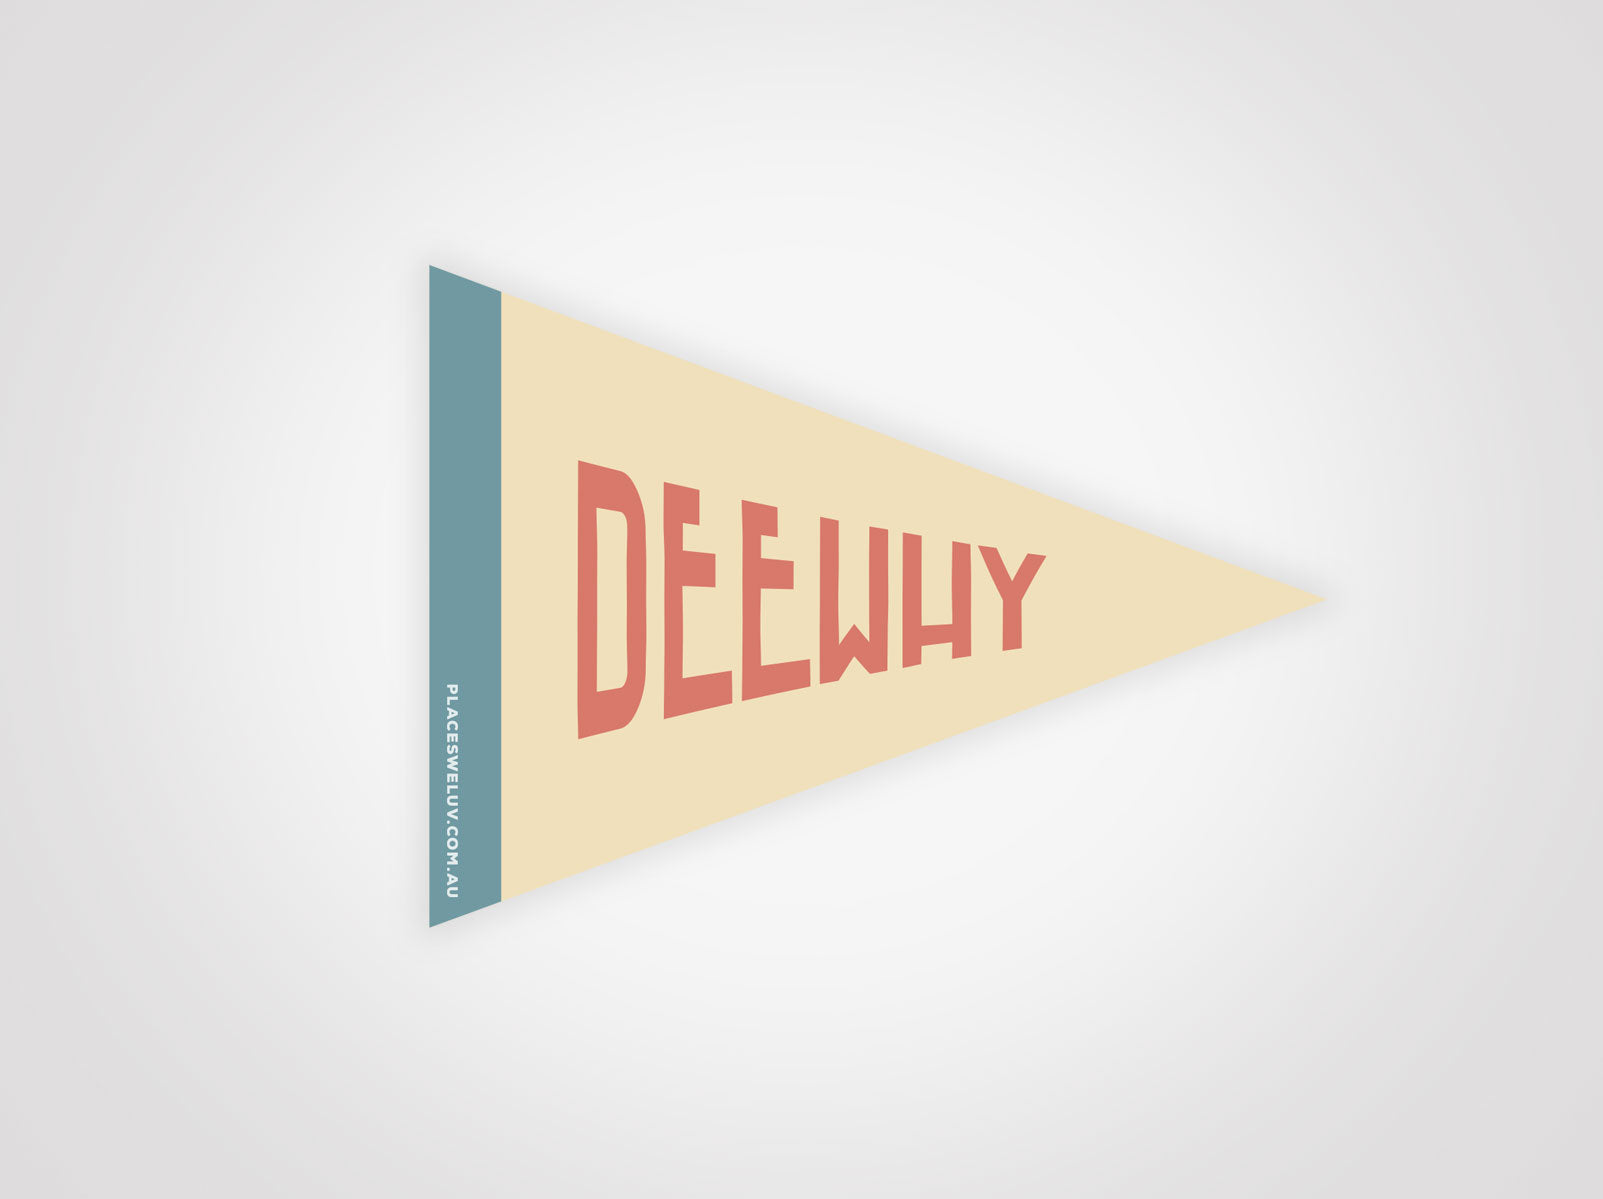 Dee Why, vintage travel style flag decal by places we luv